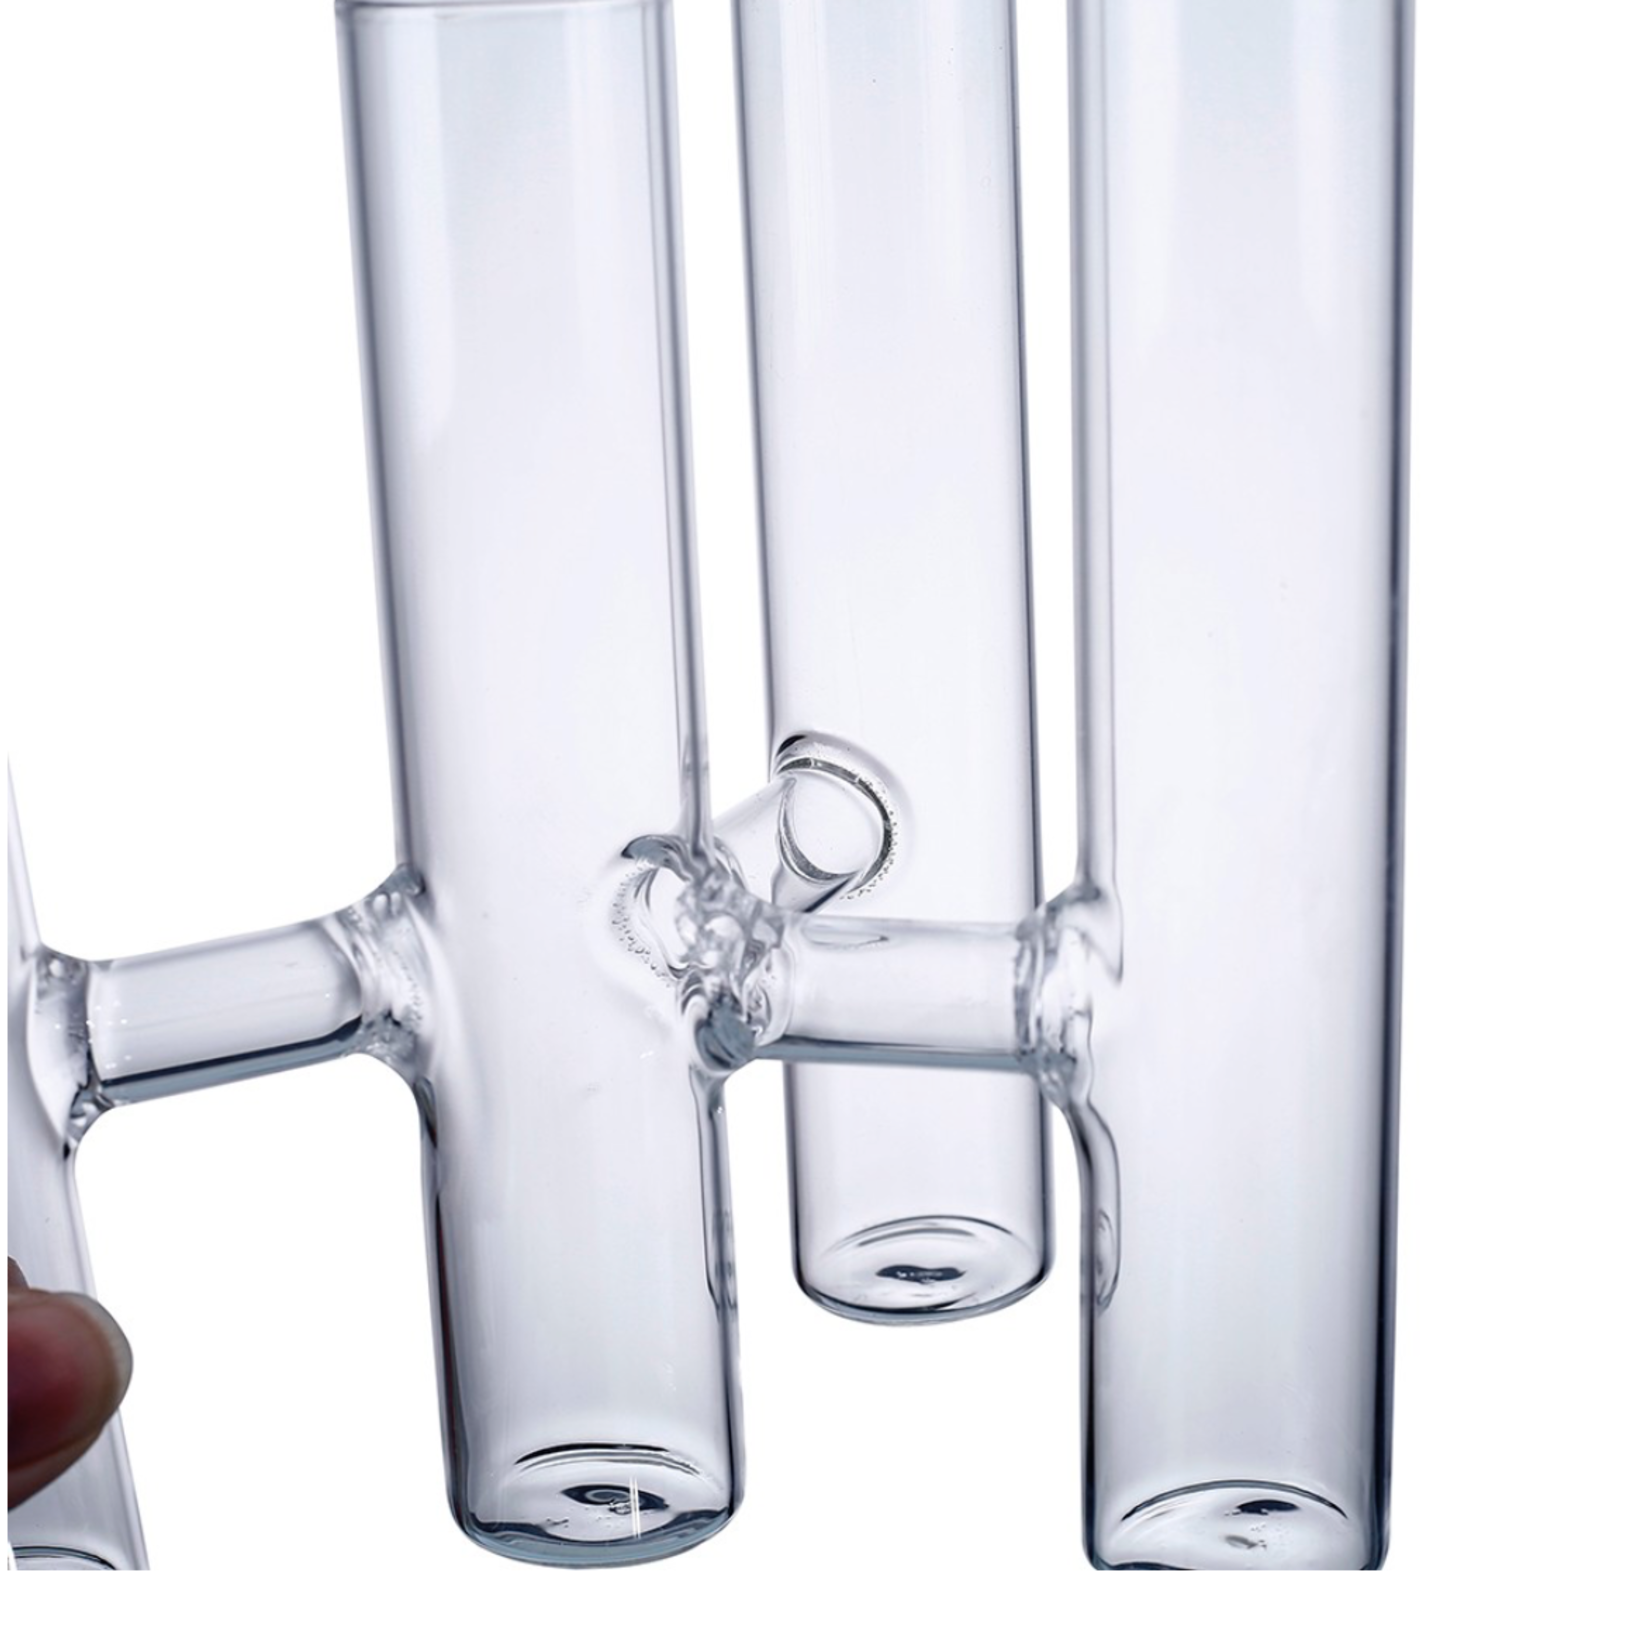 H:6" D:6”X5" ATTACHED 4 SMALL BUD VASE CYLINDERS